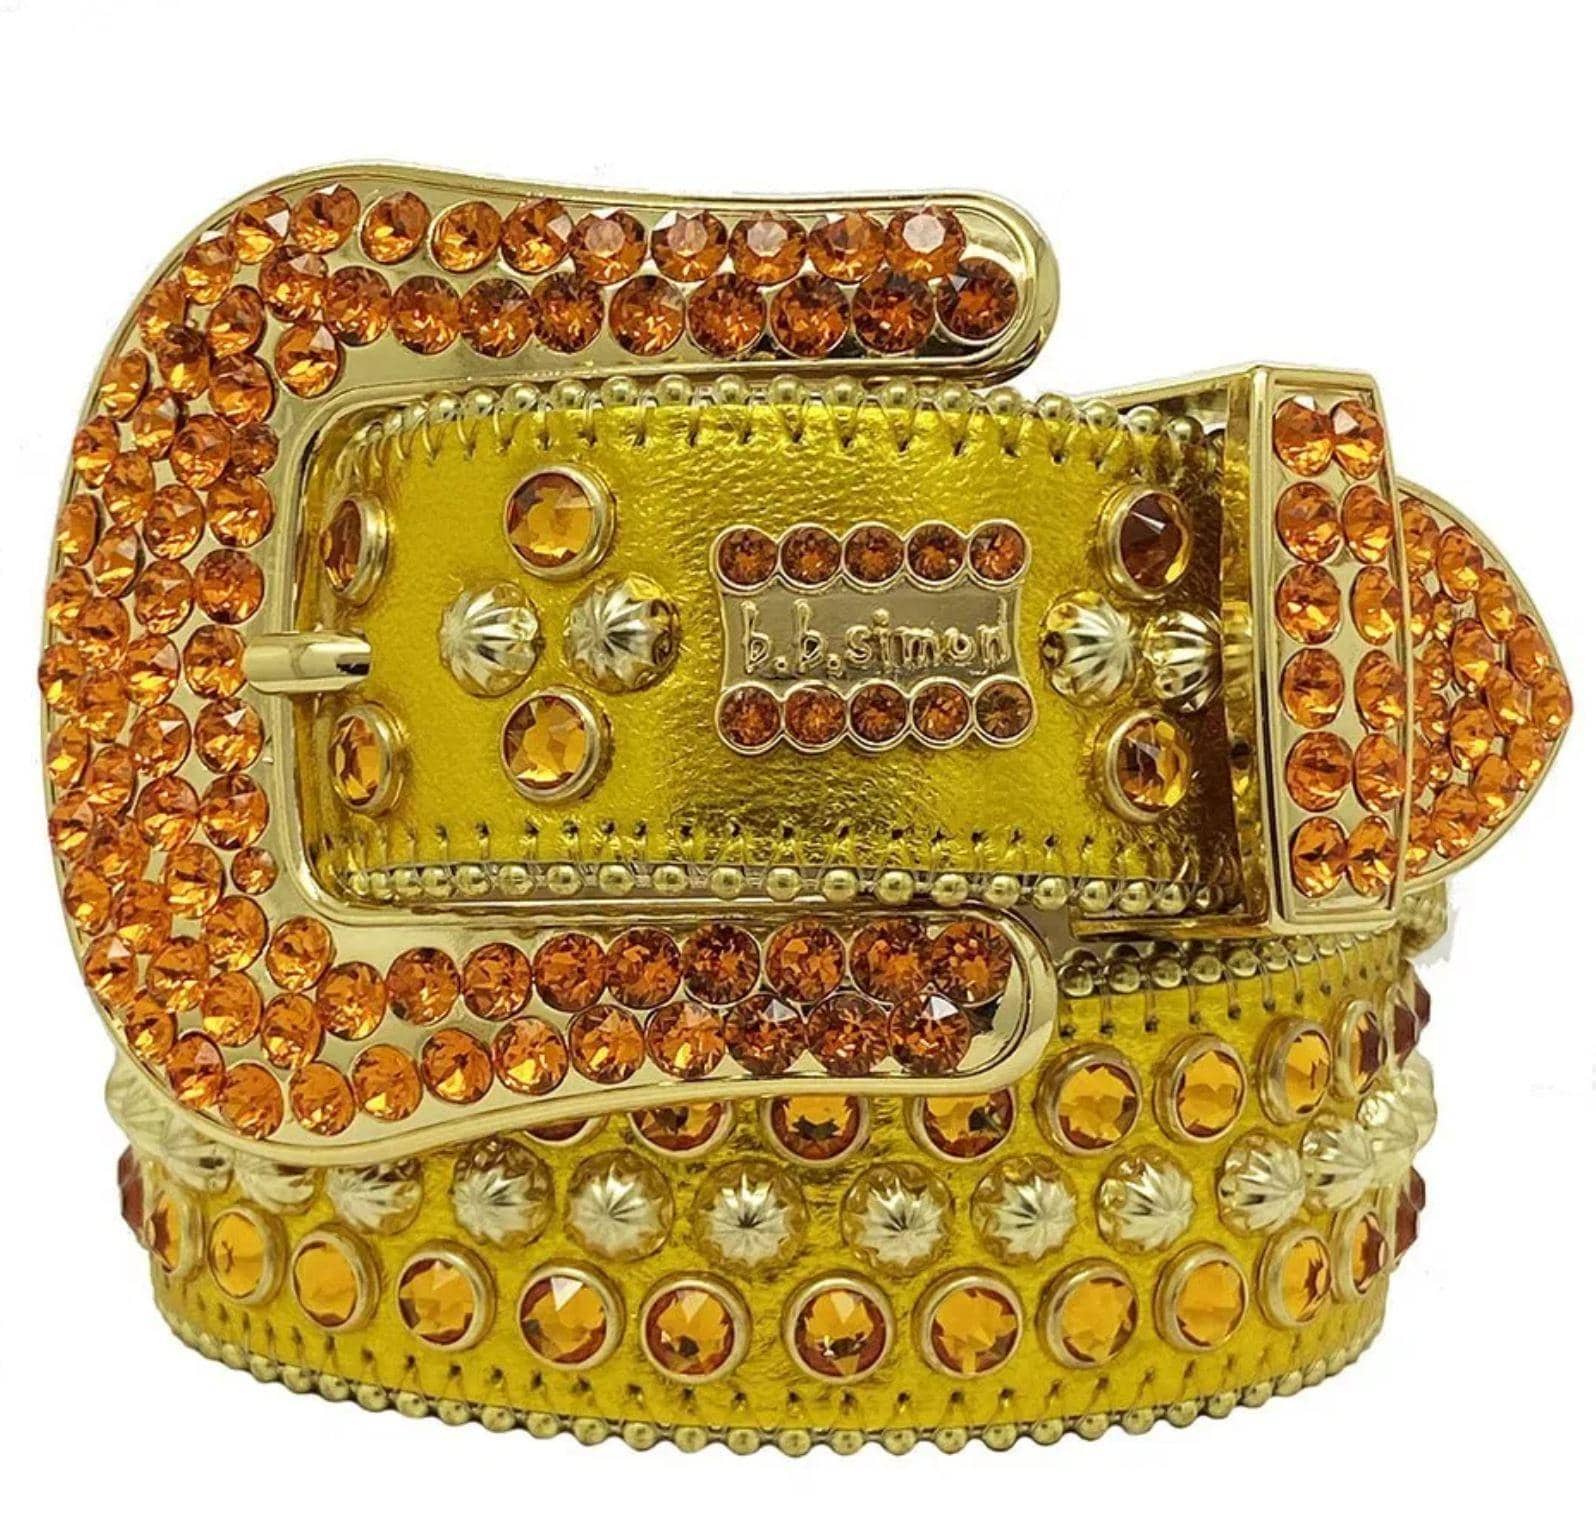 2685 K45 - BB Simon Belts Gold Leather with Crystals - Amore Accessories